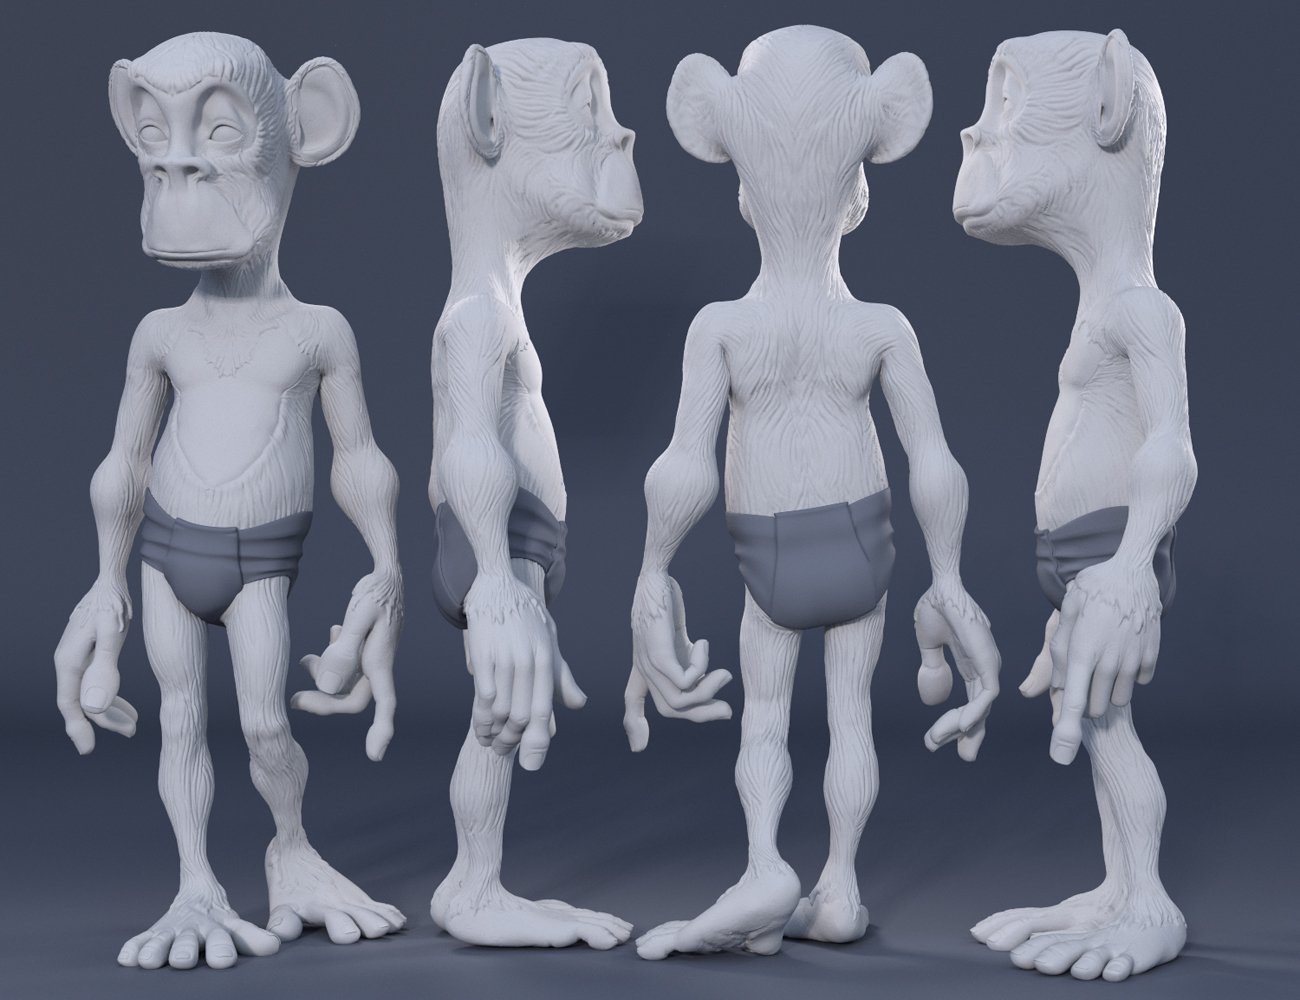 Alfred the Toon Monkey by: Sixus1 Media, 3D Models by Daz 3D